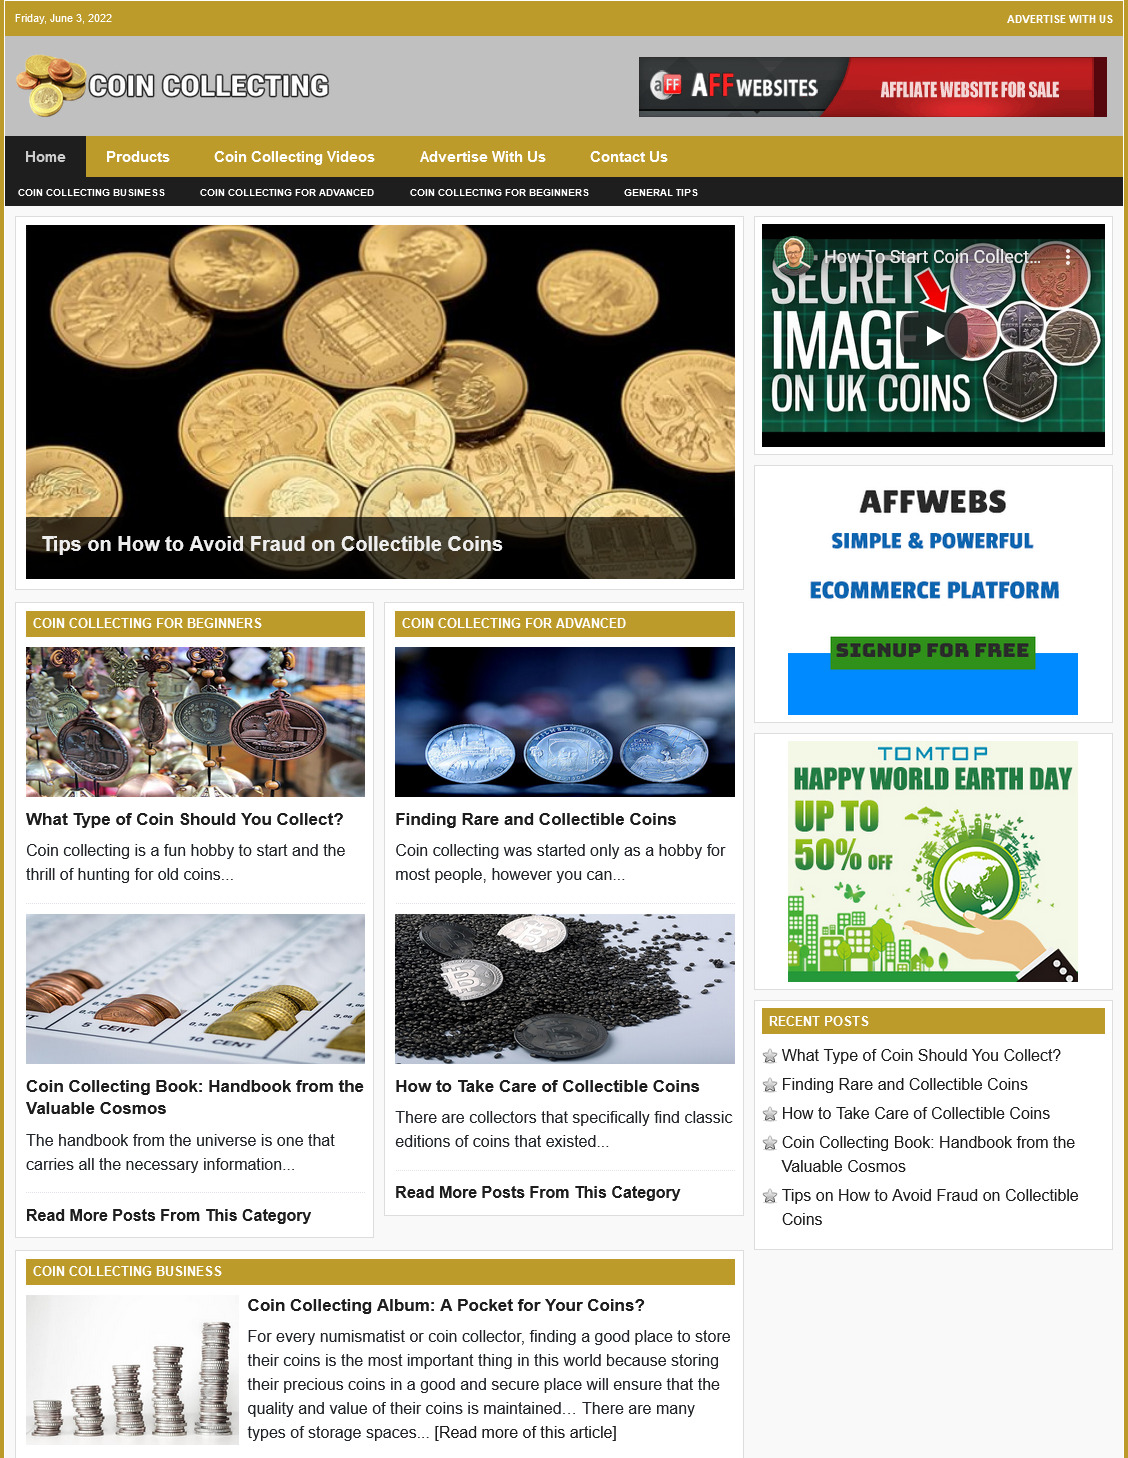 COIN COLLECTING Website Business For Sale - Work From Home Internet Business